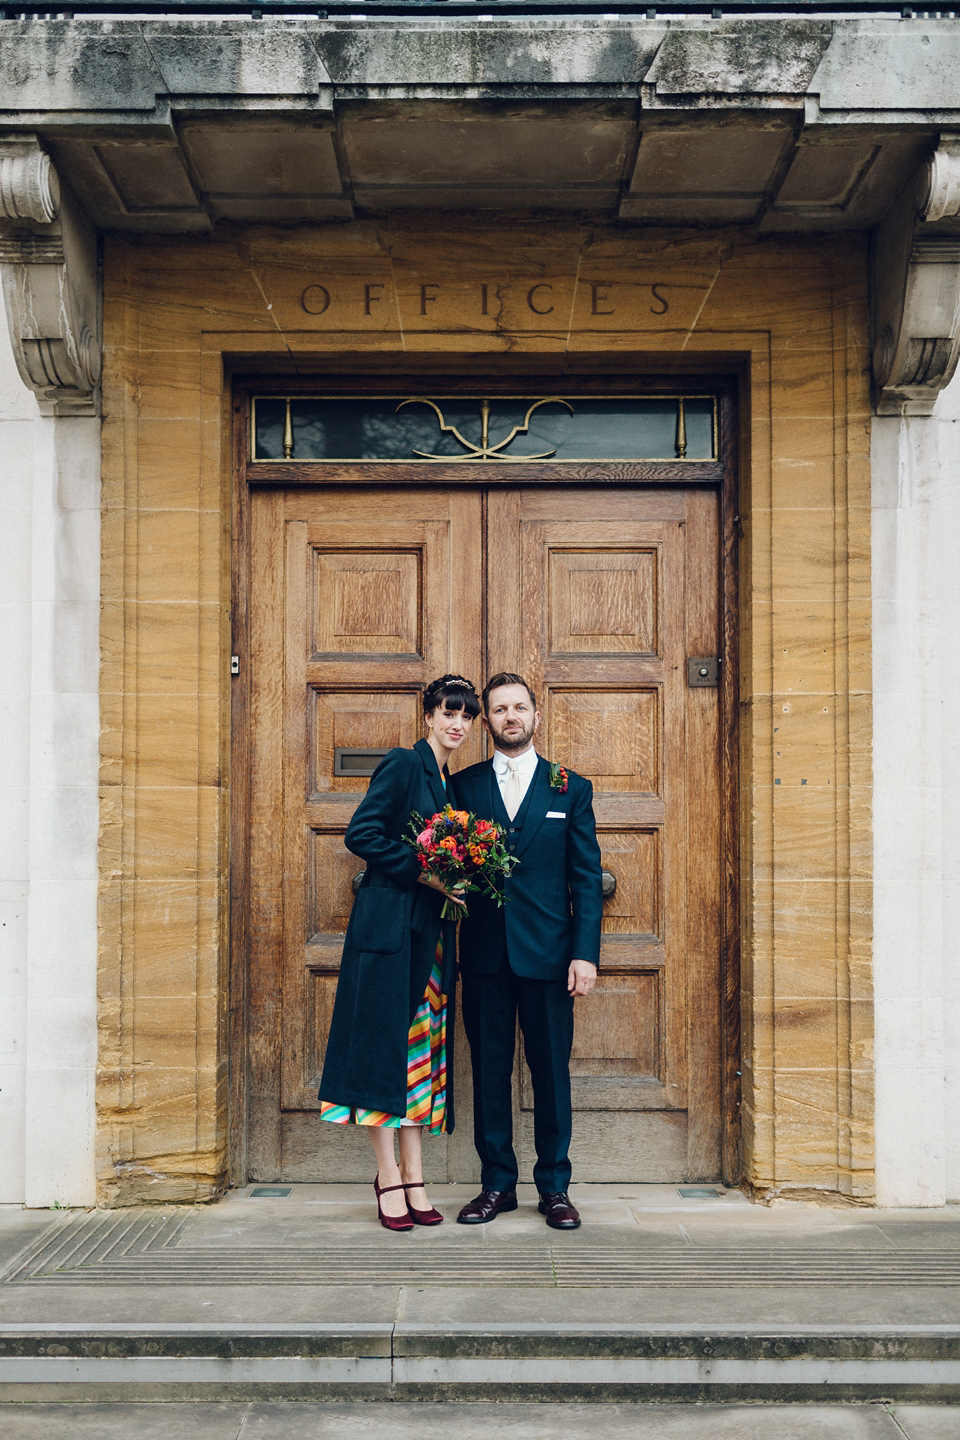 Megan wears a colourful rainbow Valentino gown for her cool and quirky London pub wedding. Photography by Lee Garland.